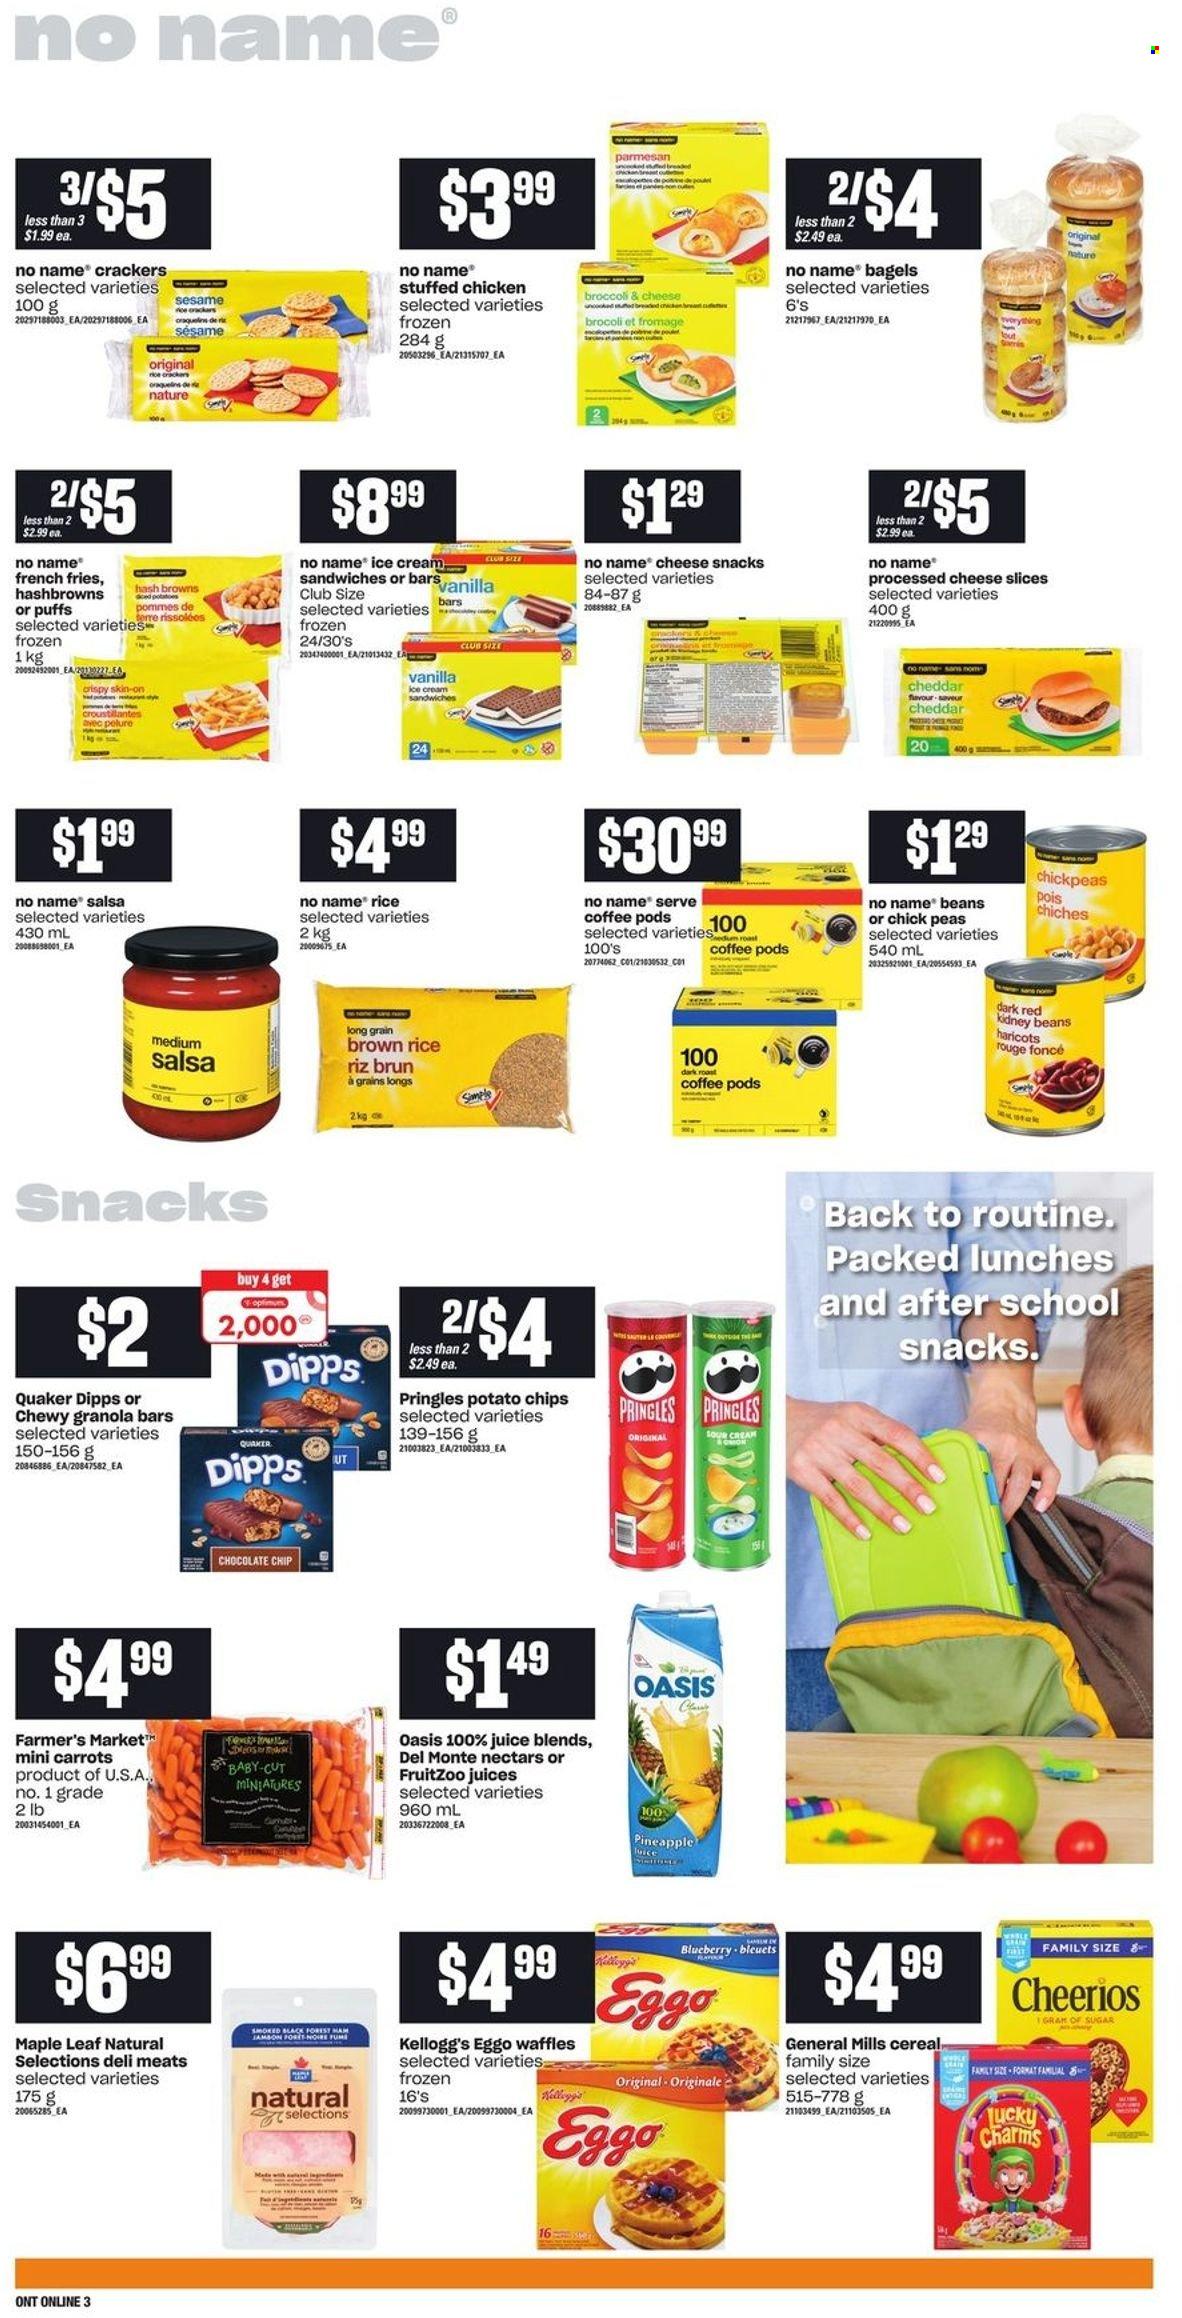 thumbnail - Loblaws Flyer - January 06, 2022 - January 12, 2022 - Sales products - bagels, puffs, waffles, broccoli, carrots, peas, pineapple, No Name, Quaker, stuffed chicken, sliced cheese, parmesan, ice cream, ice cream sandwich, hash browns, potato fries, french fries, snack, crackers, Kellogg's, potato chips, Pringles, sugar, kidney beans, cereals, Cheerios, granola bar, brown rice, rice, chickpeas, salsa, juice, coffee pods. Page 7.